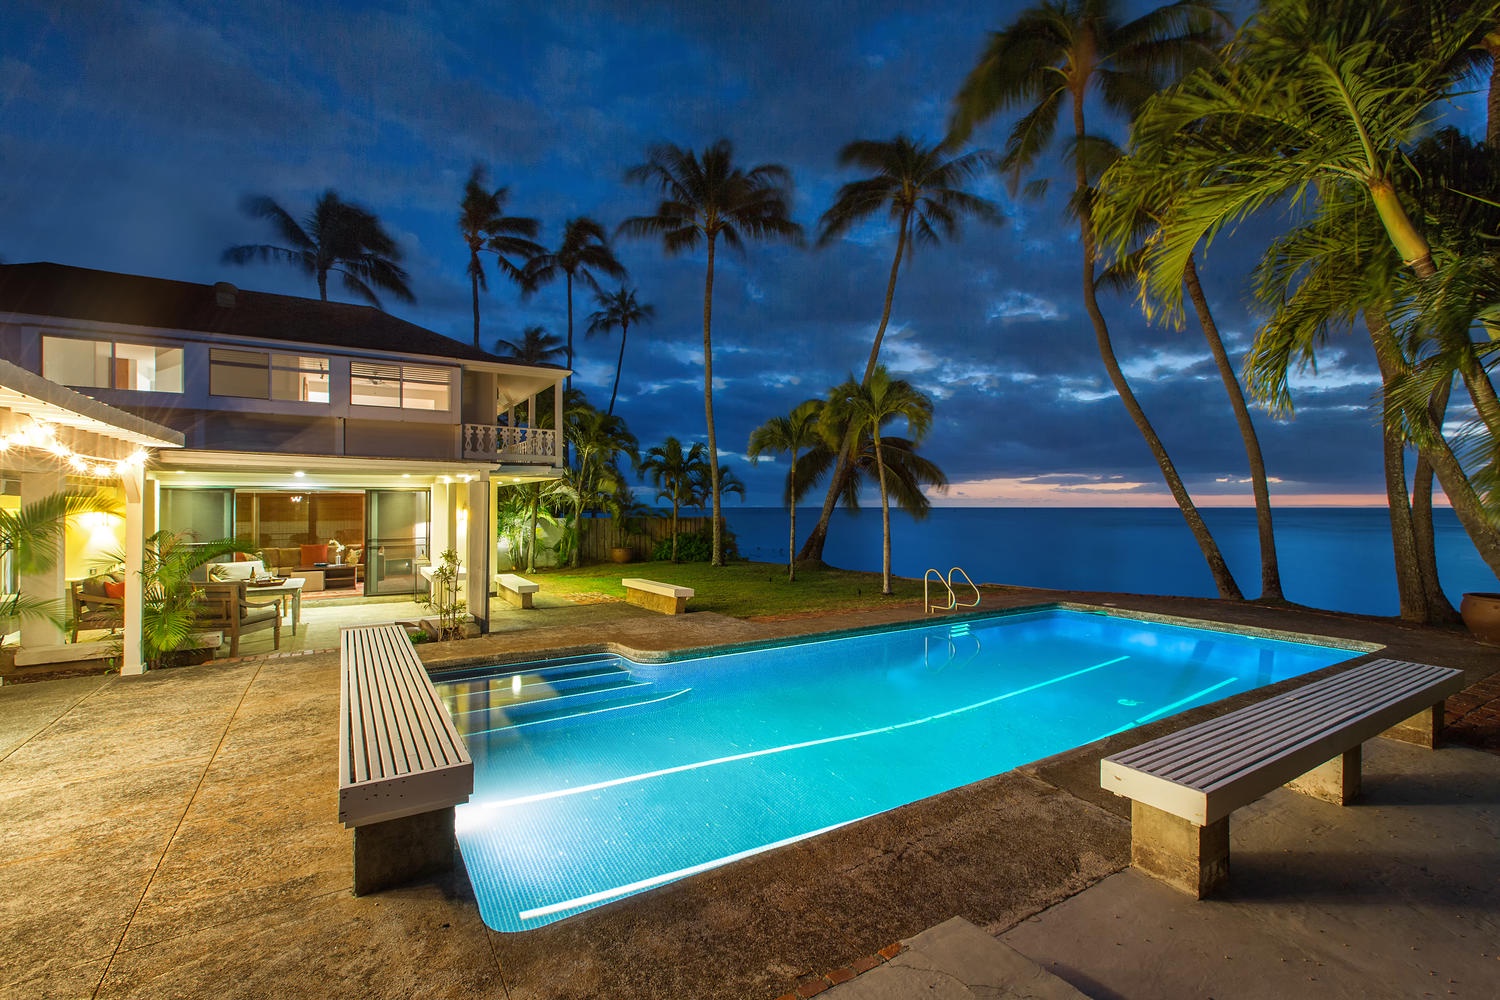 Honolulu Vacation Rentals, Hale Kai - Your very own private oasis!